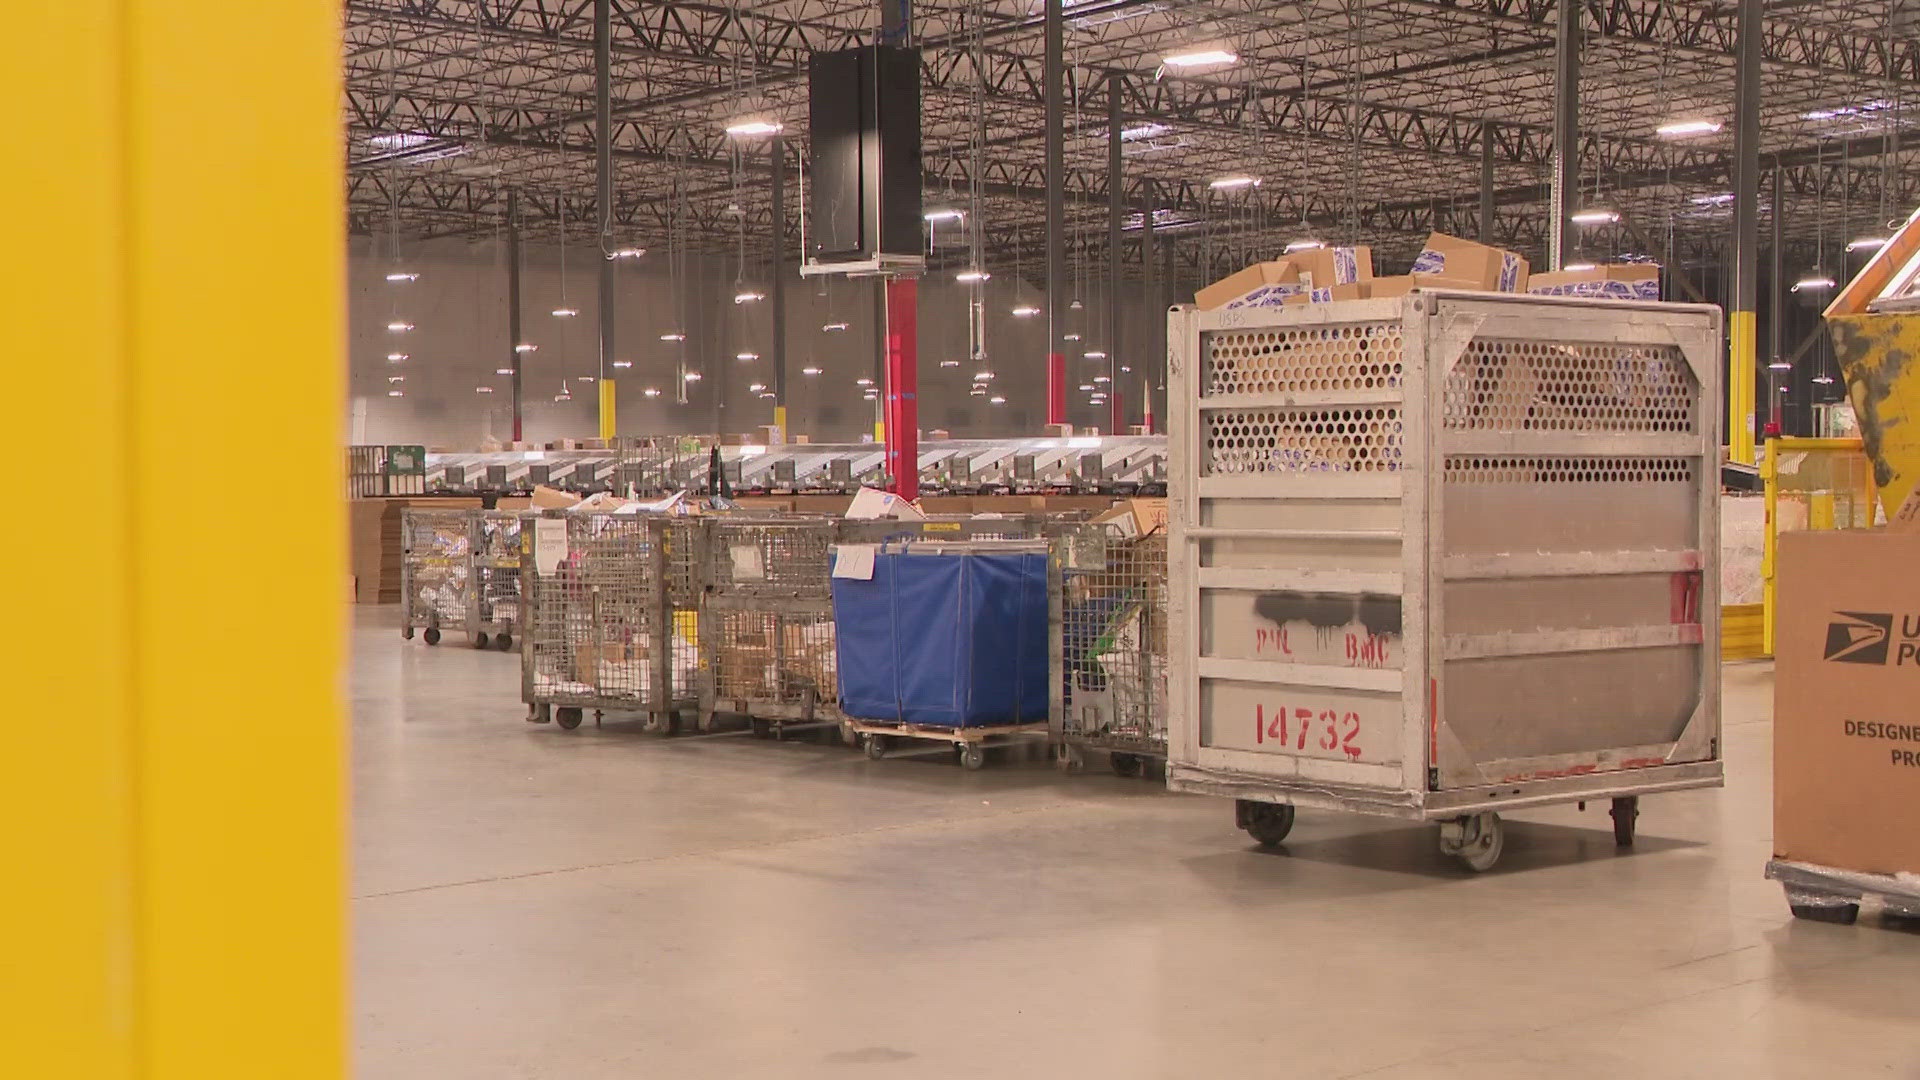 KHOU 11 News took a tour of the USPS processing center in Missouri City.